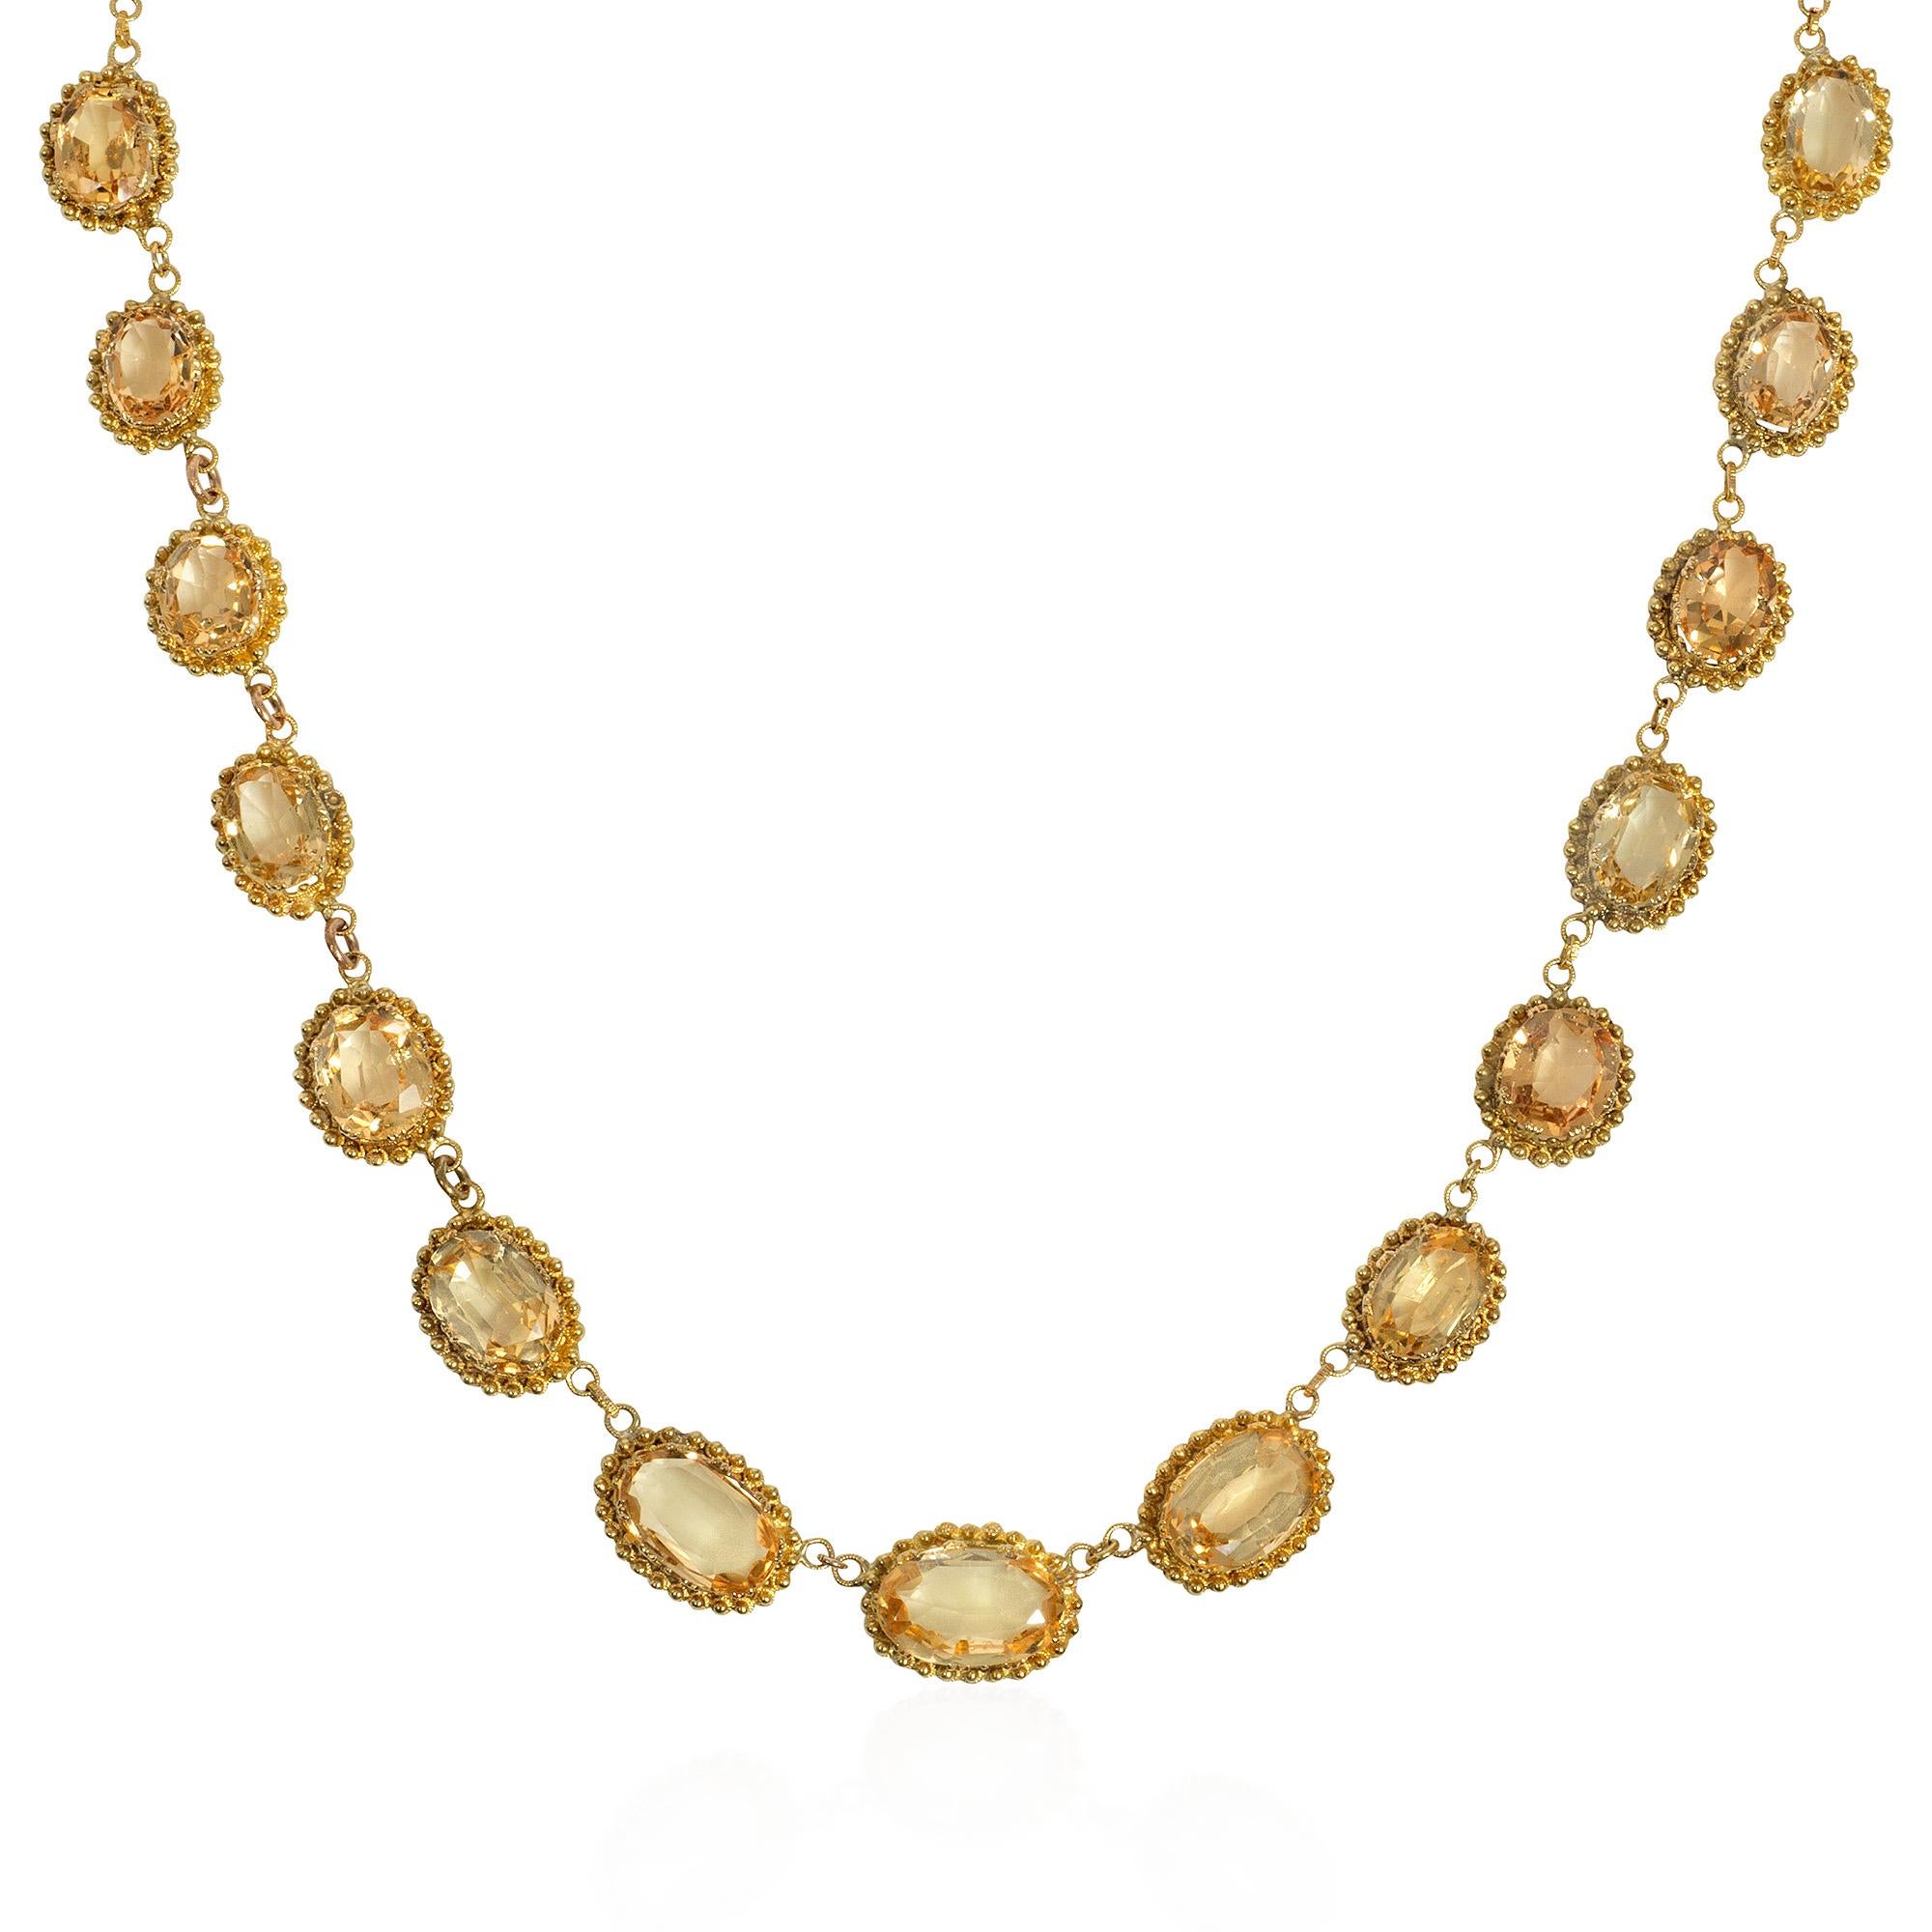 A Victorian gold and topaz rivière necklace comprised of graduated oval topaz in granulated cannetille settings, in 18k. French import marks

Topaz measurements as mounted approximately 5mm x 7.5mm to 8mm x 11mm